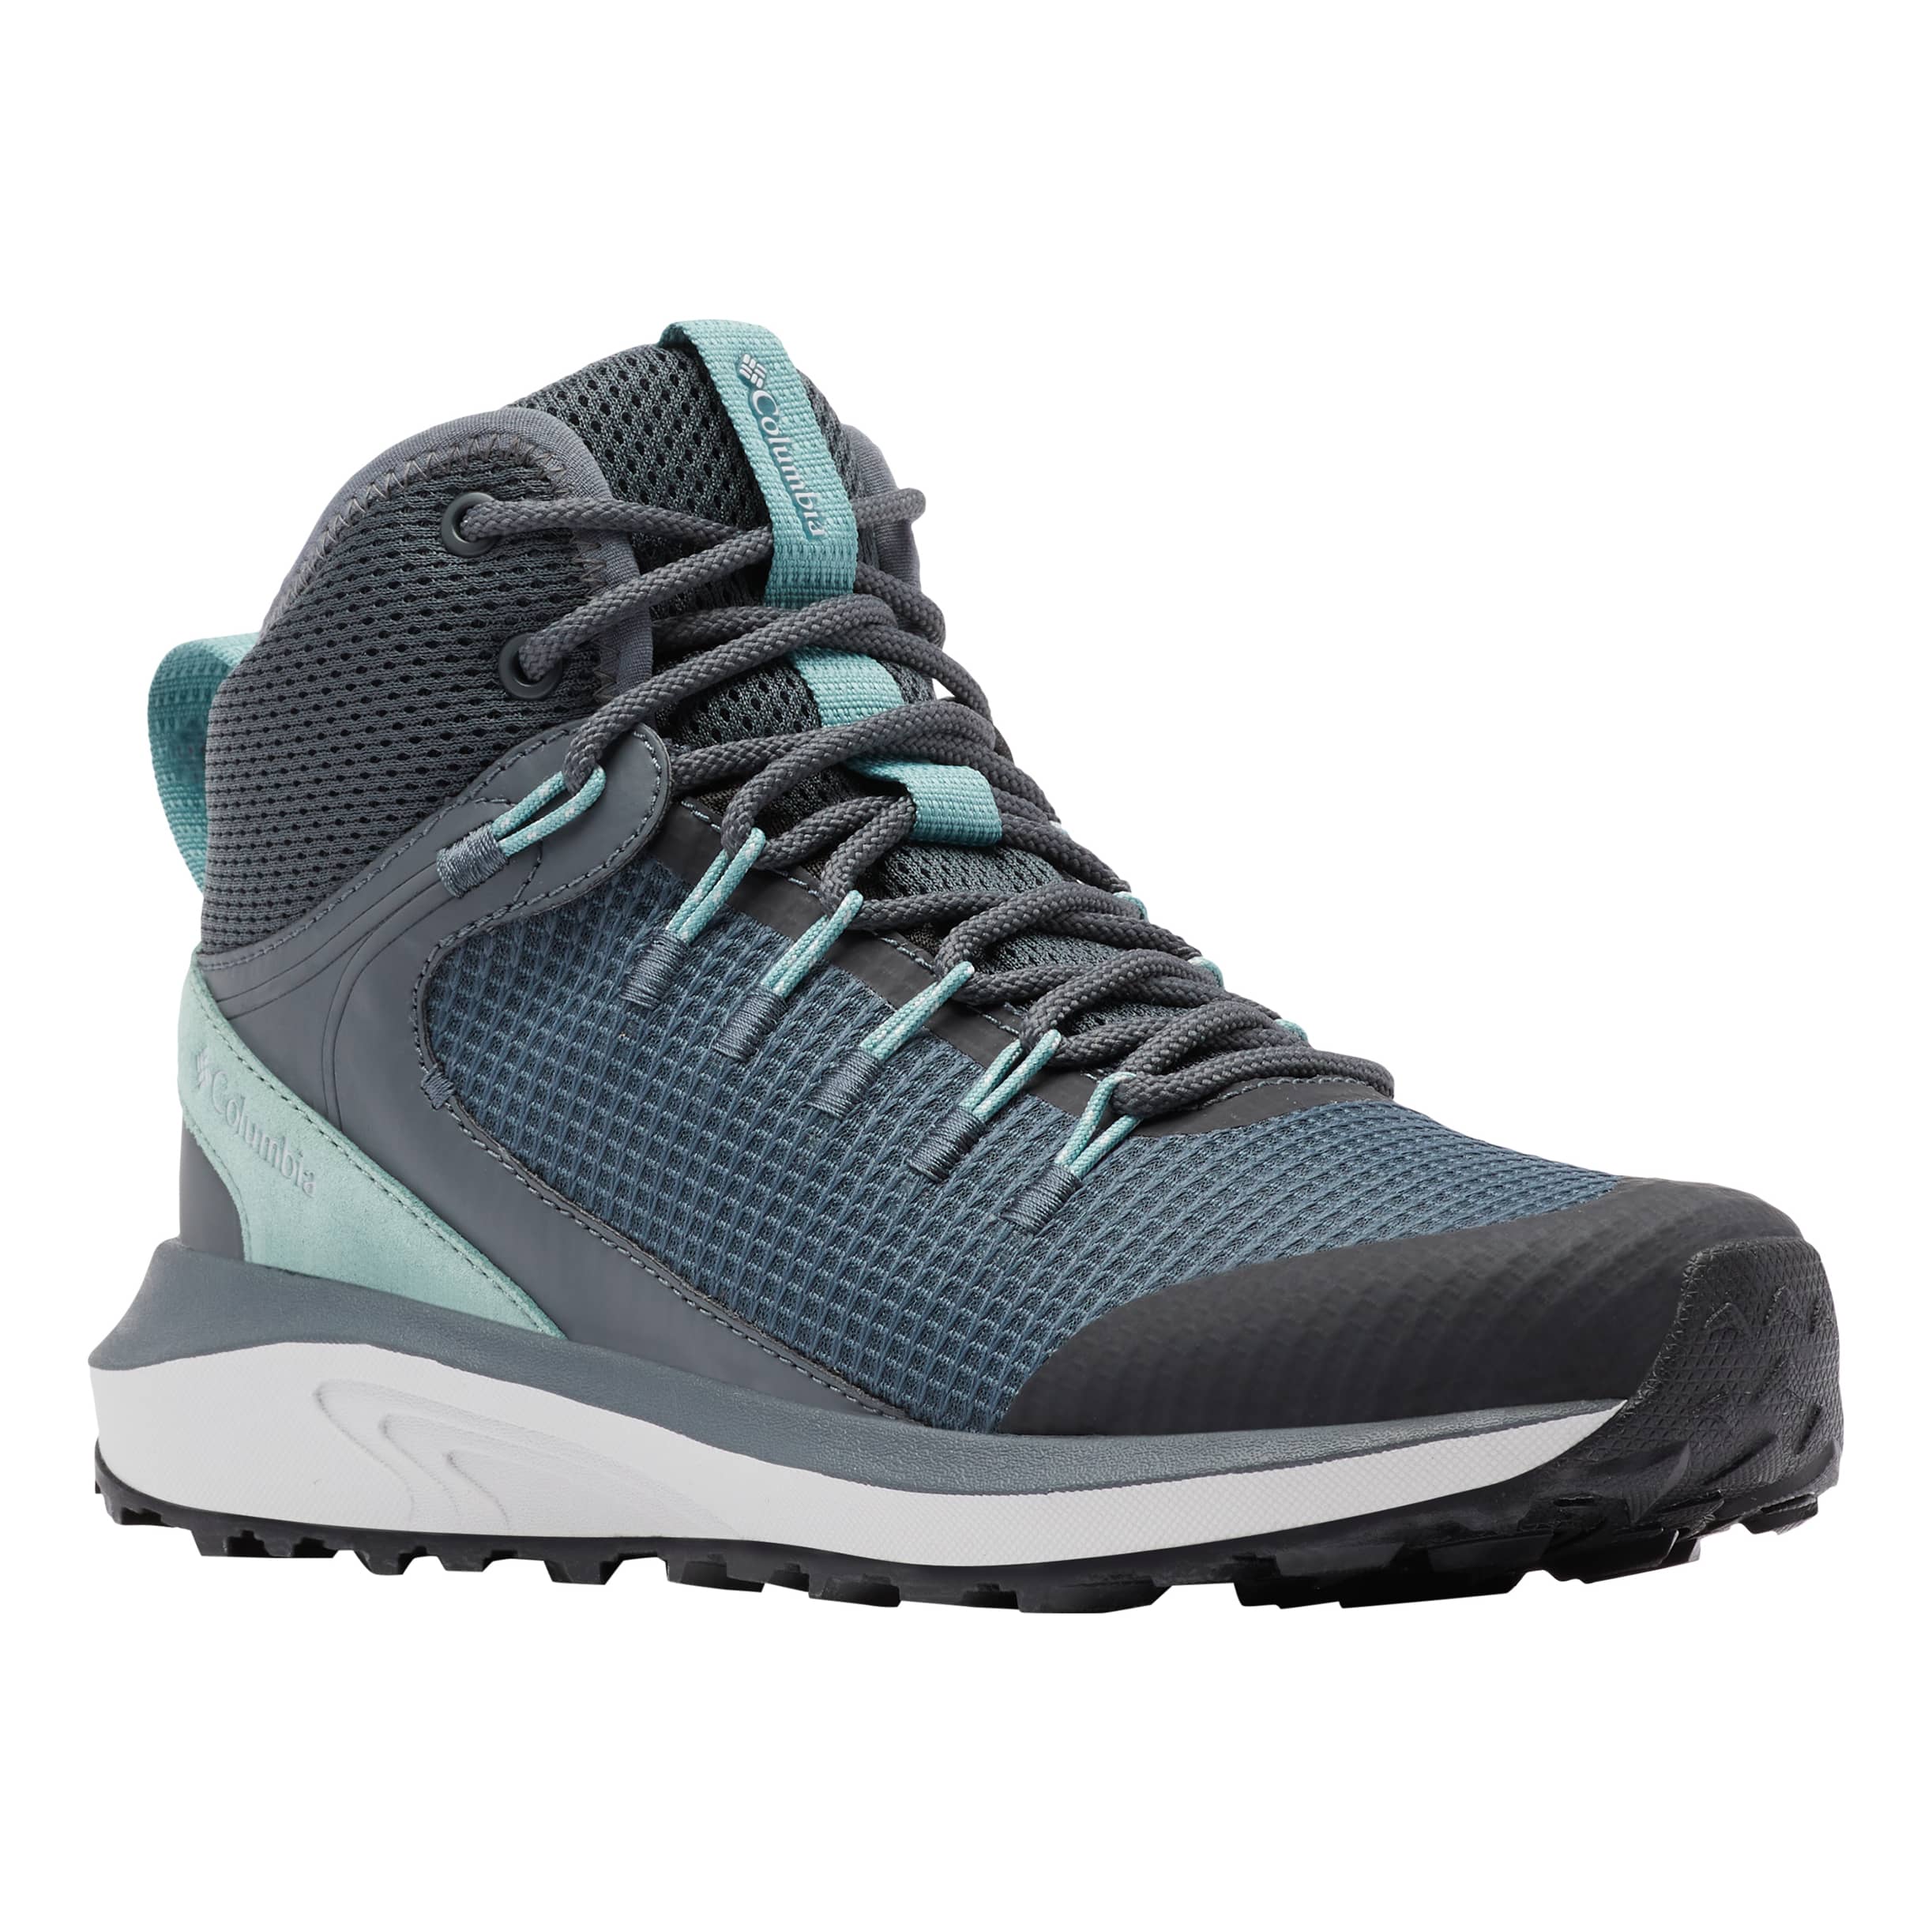 Under Armour Women's Charged Bandit Trail 2 Running Grey/grey _ 173687